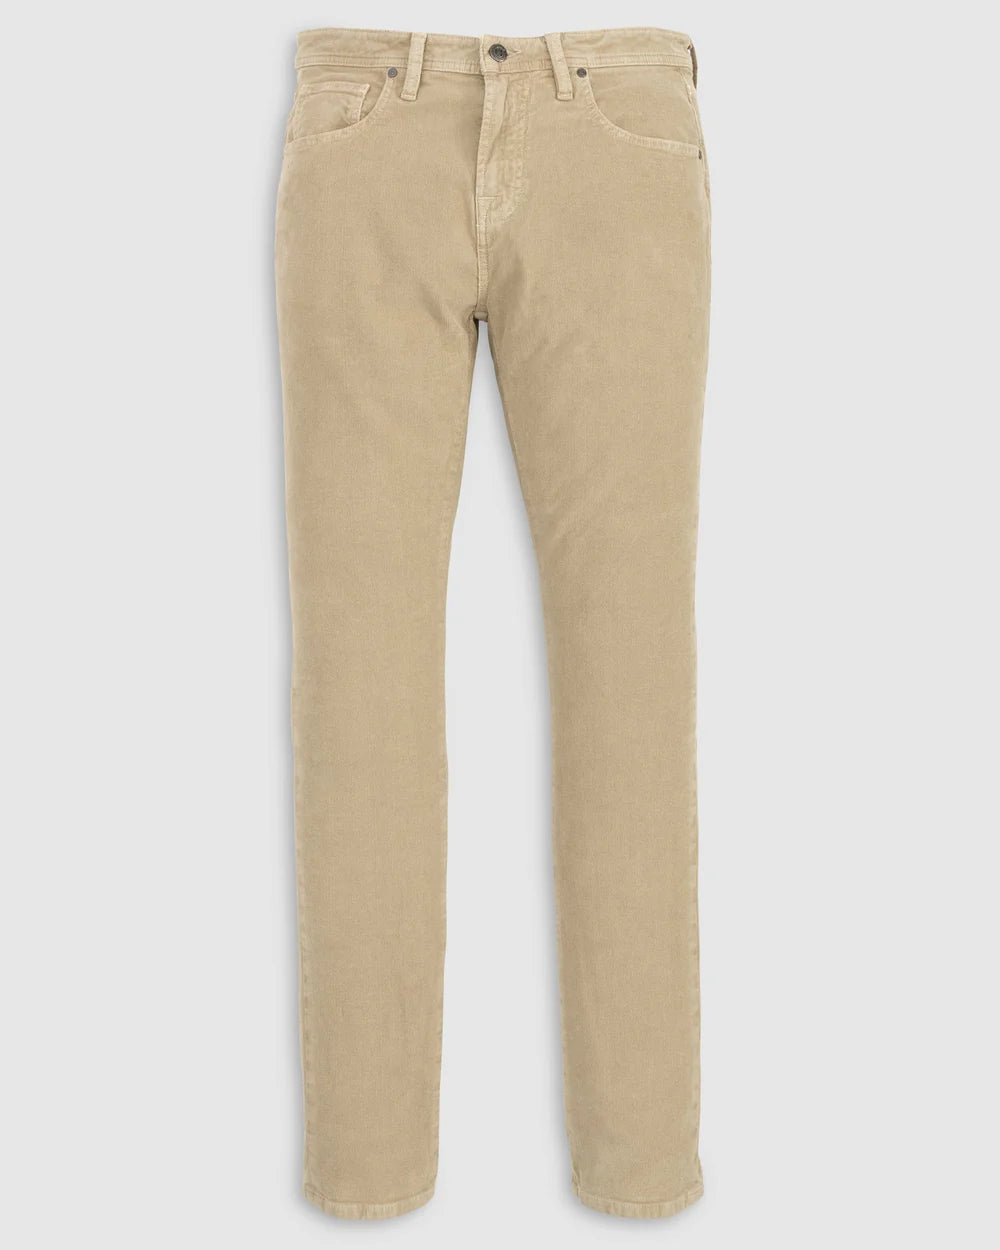 Jeans and R. Five – Coffee Pocket Pants